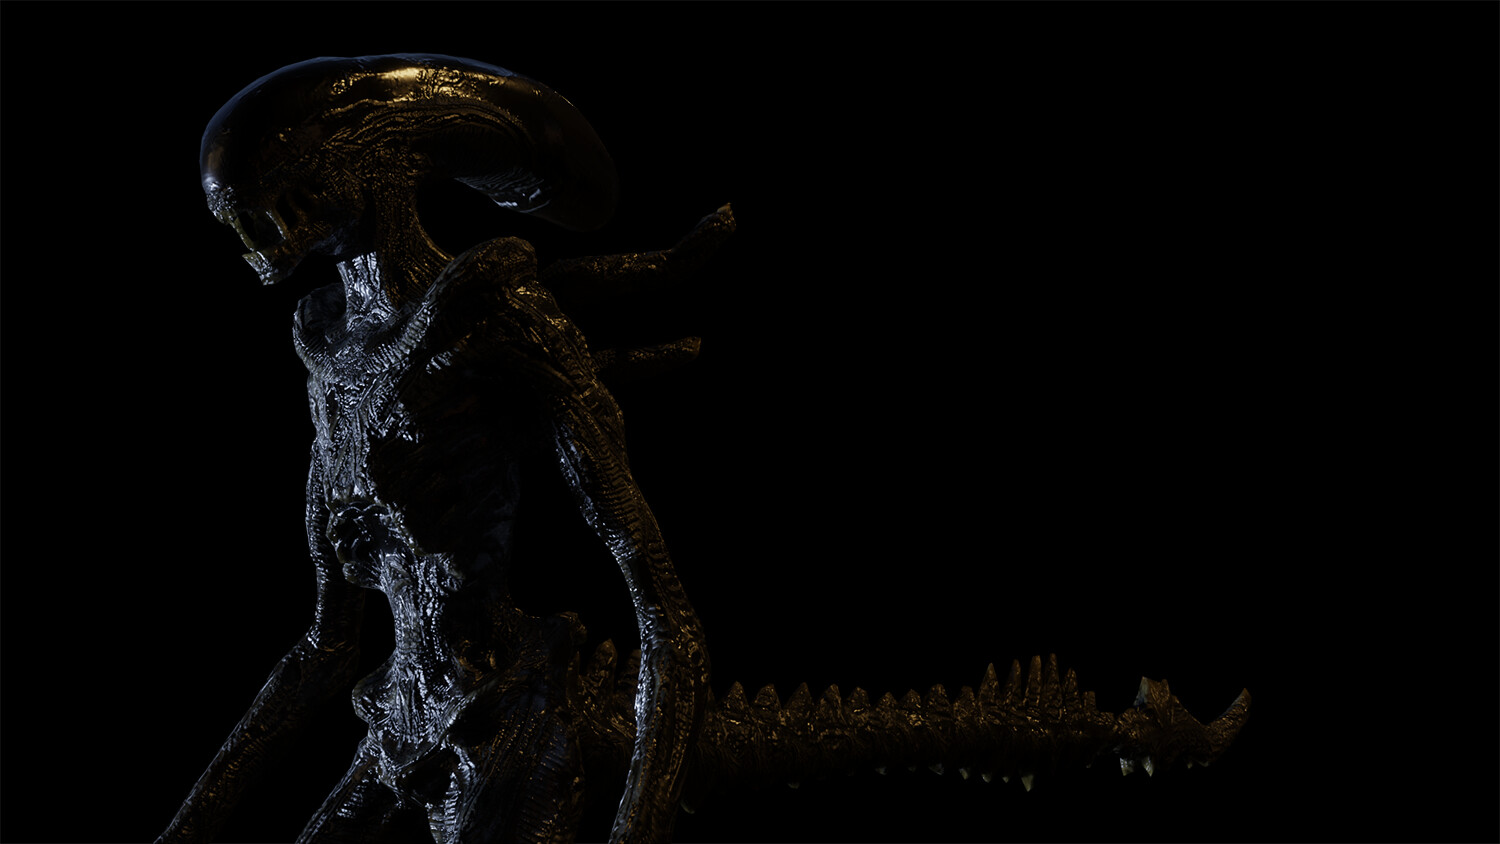 toothless Xenomorph model I used to create some compositions later on